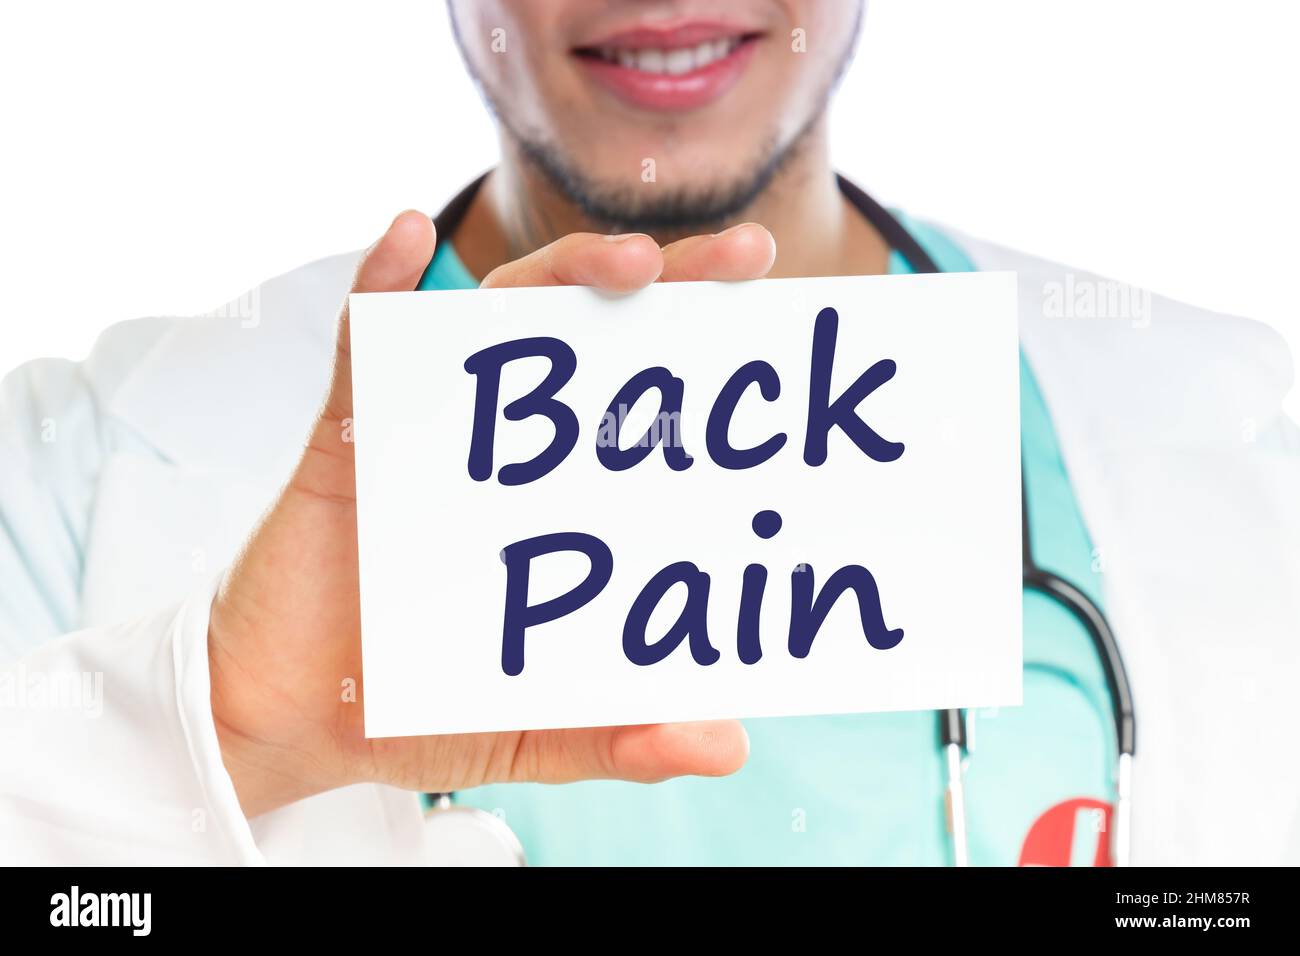 Back pain screening check-up ill illness healthy health doctor with sign Stock Photo